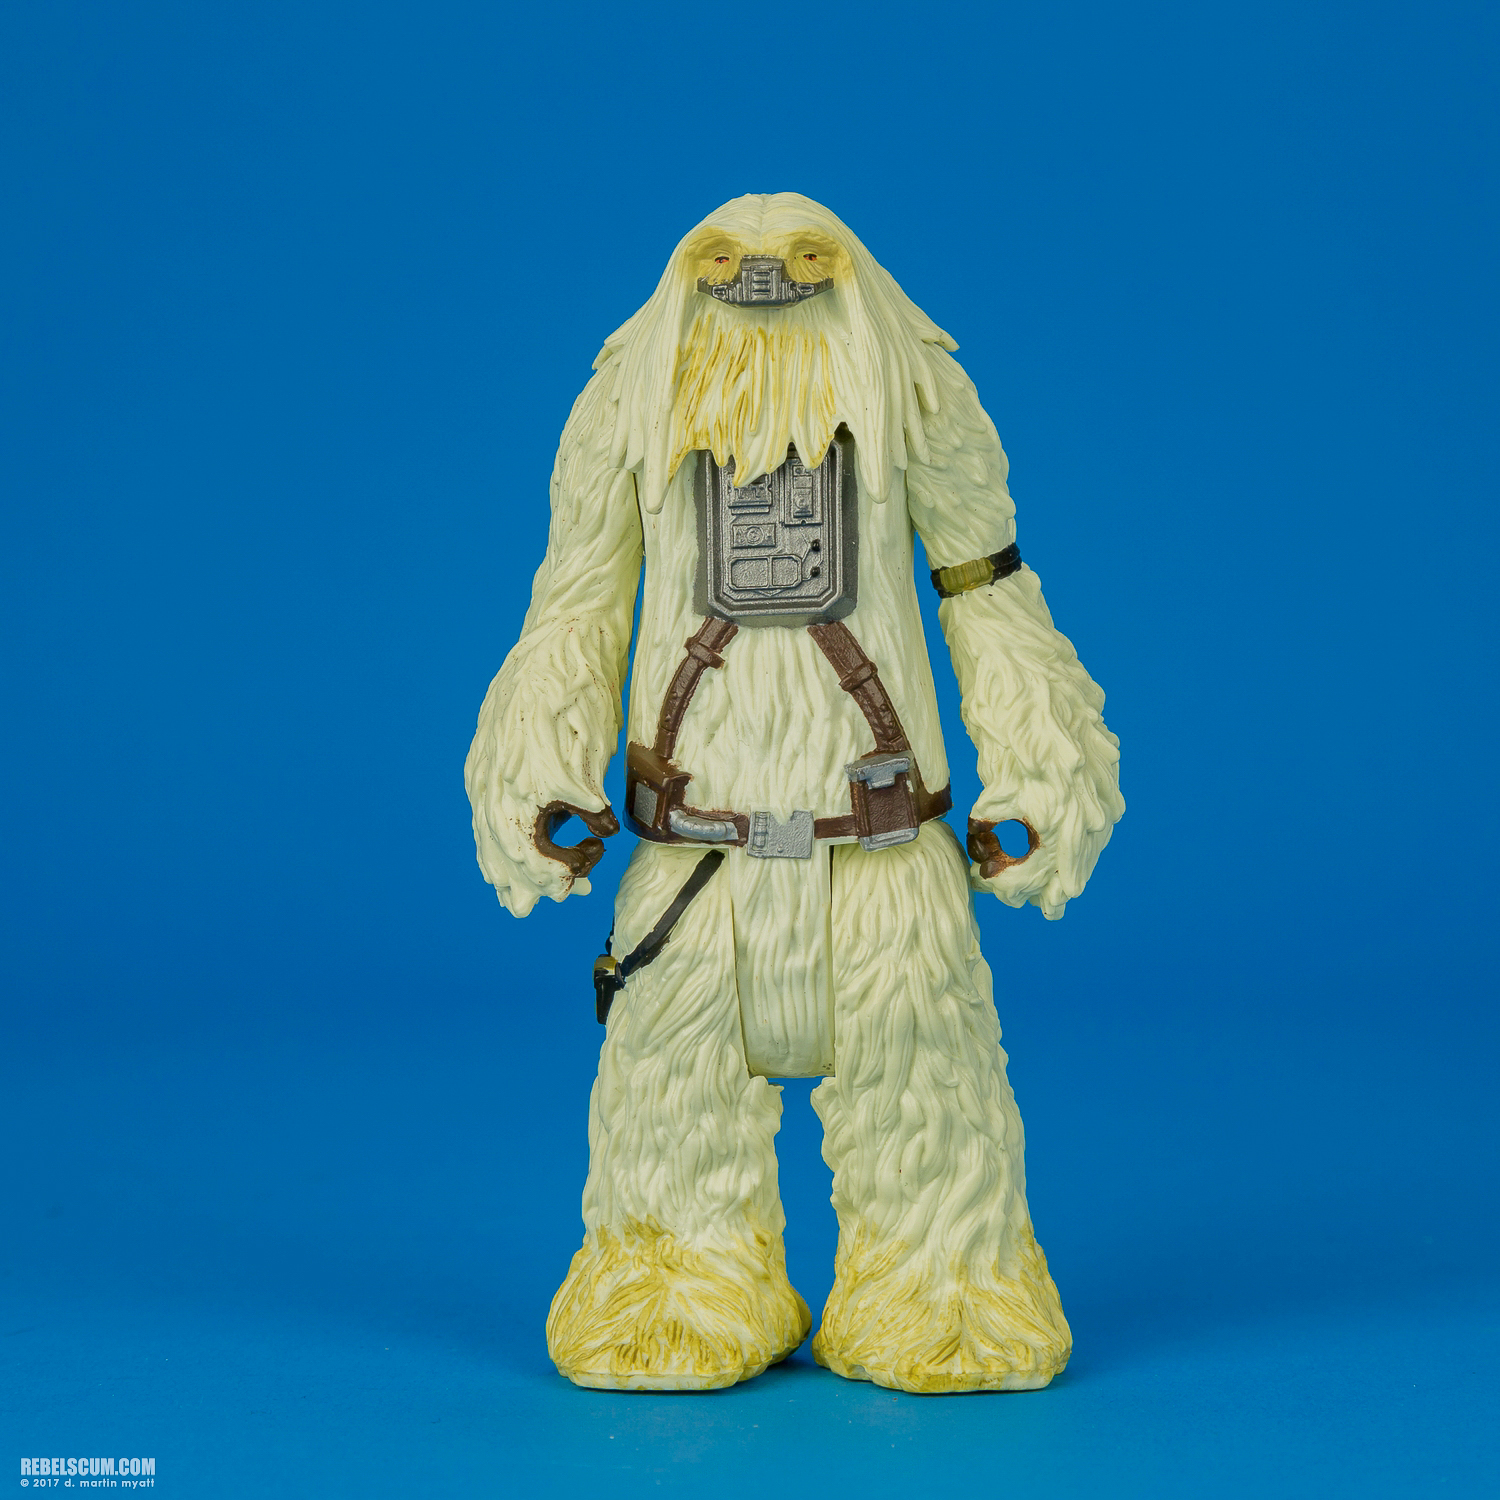 Kohls-Exclusive-Four-Pack-Rogue-One-B9605-030.jpg